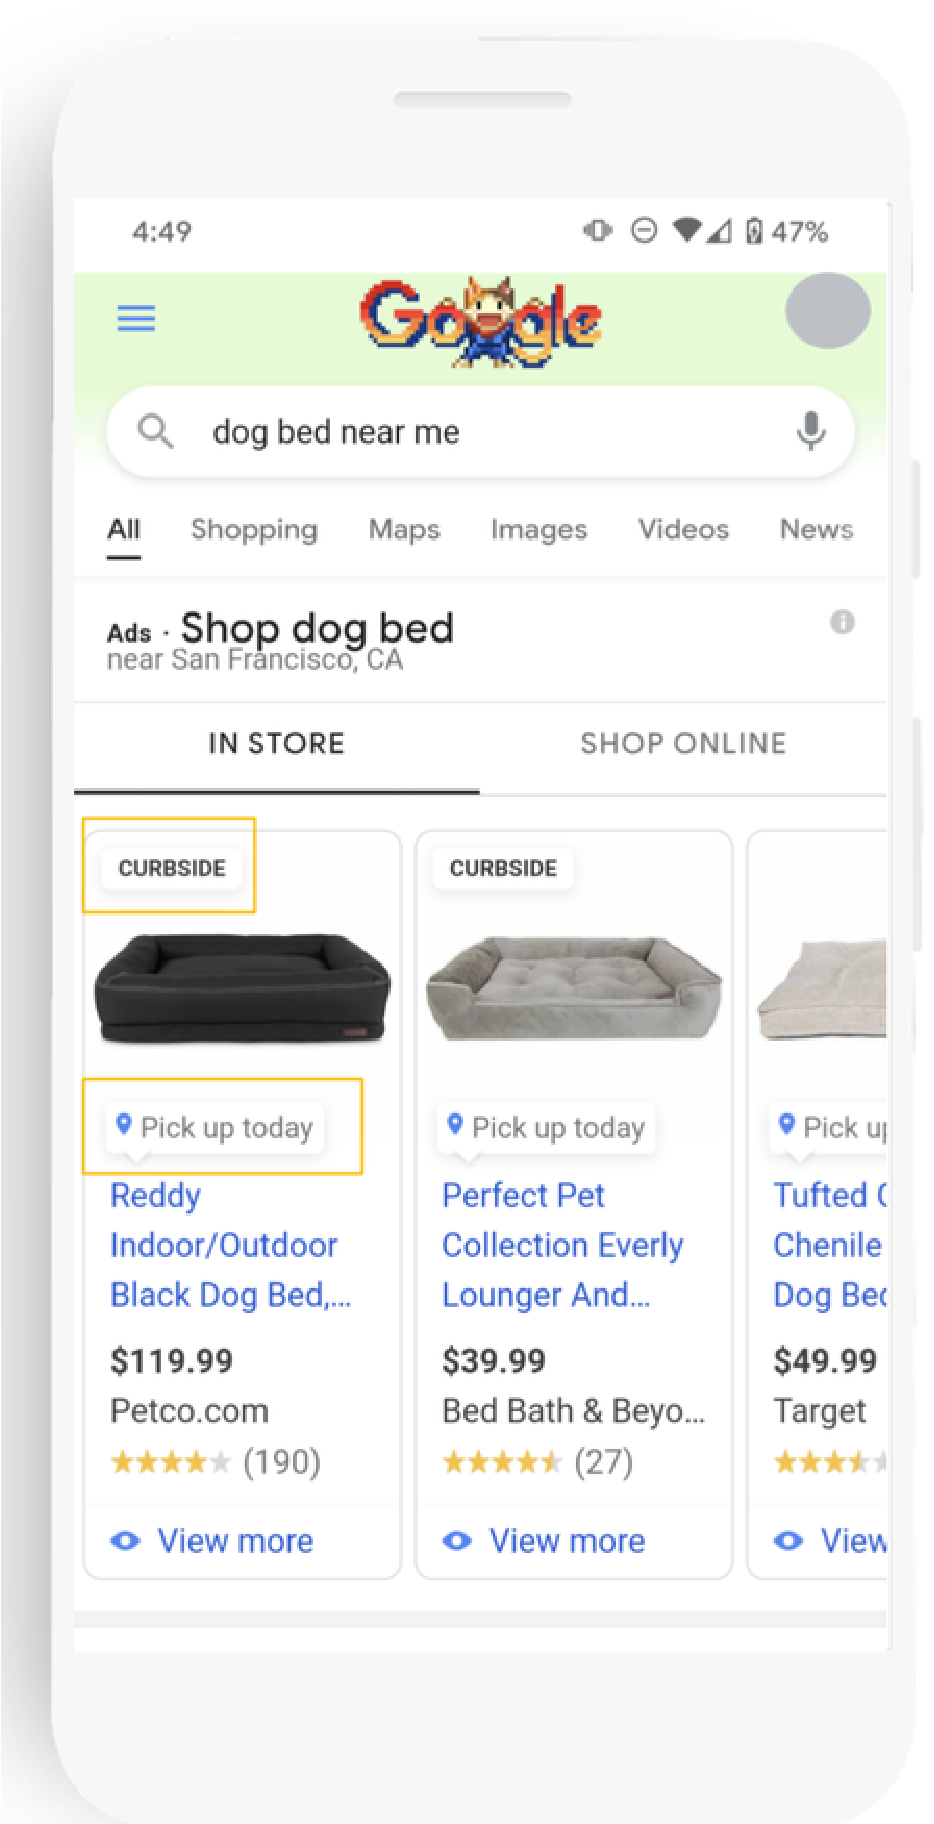 The image shows Google Shopping results whose products can be found not only online but also in the store. These are marked with a special pickup label (marked in yellow).